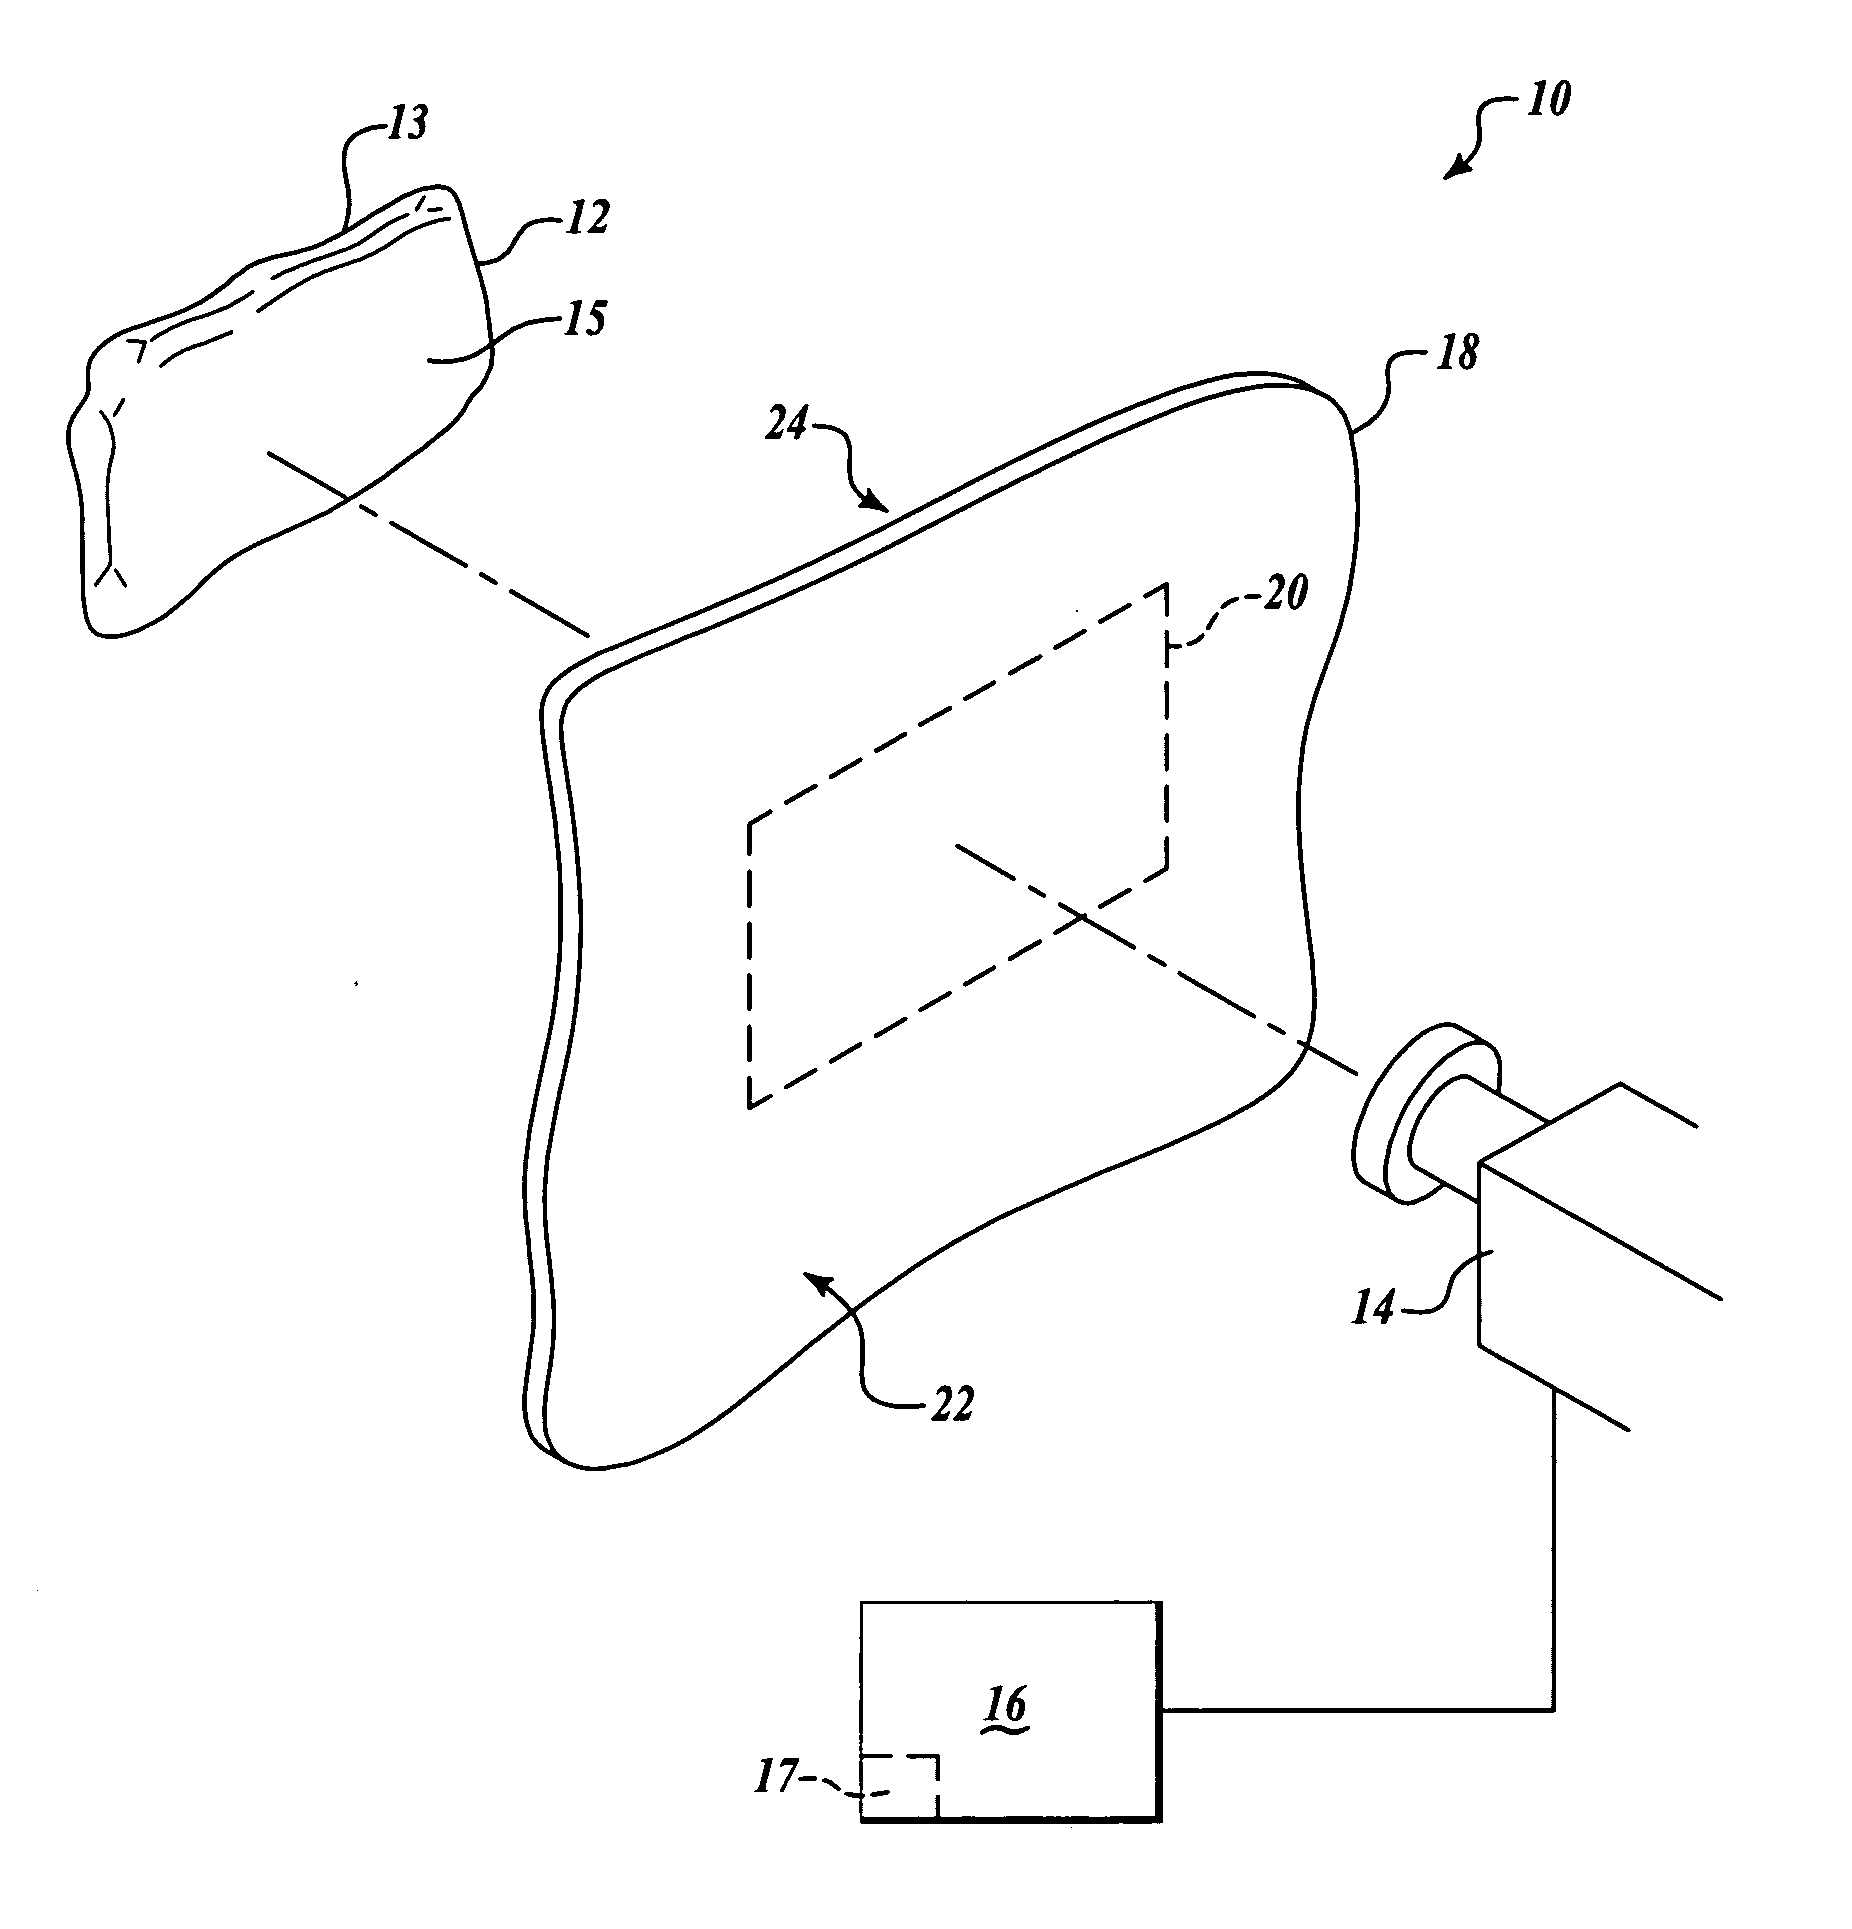 Systems and methods for thermographic inspection of composite structures